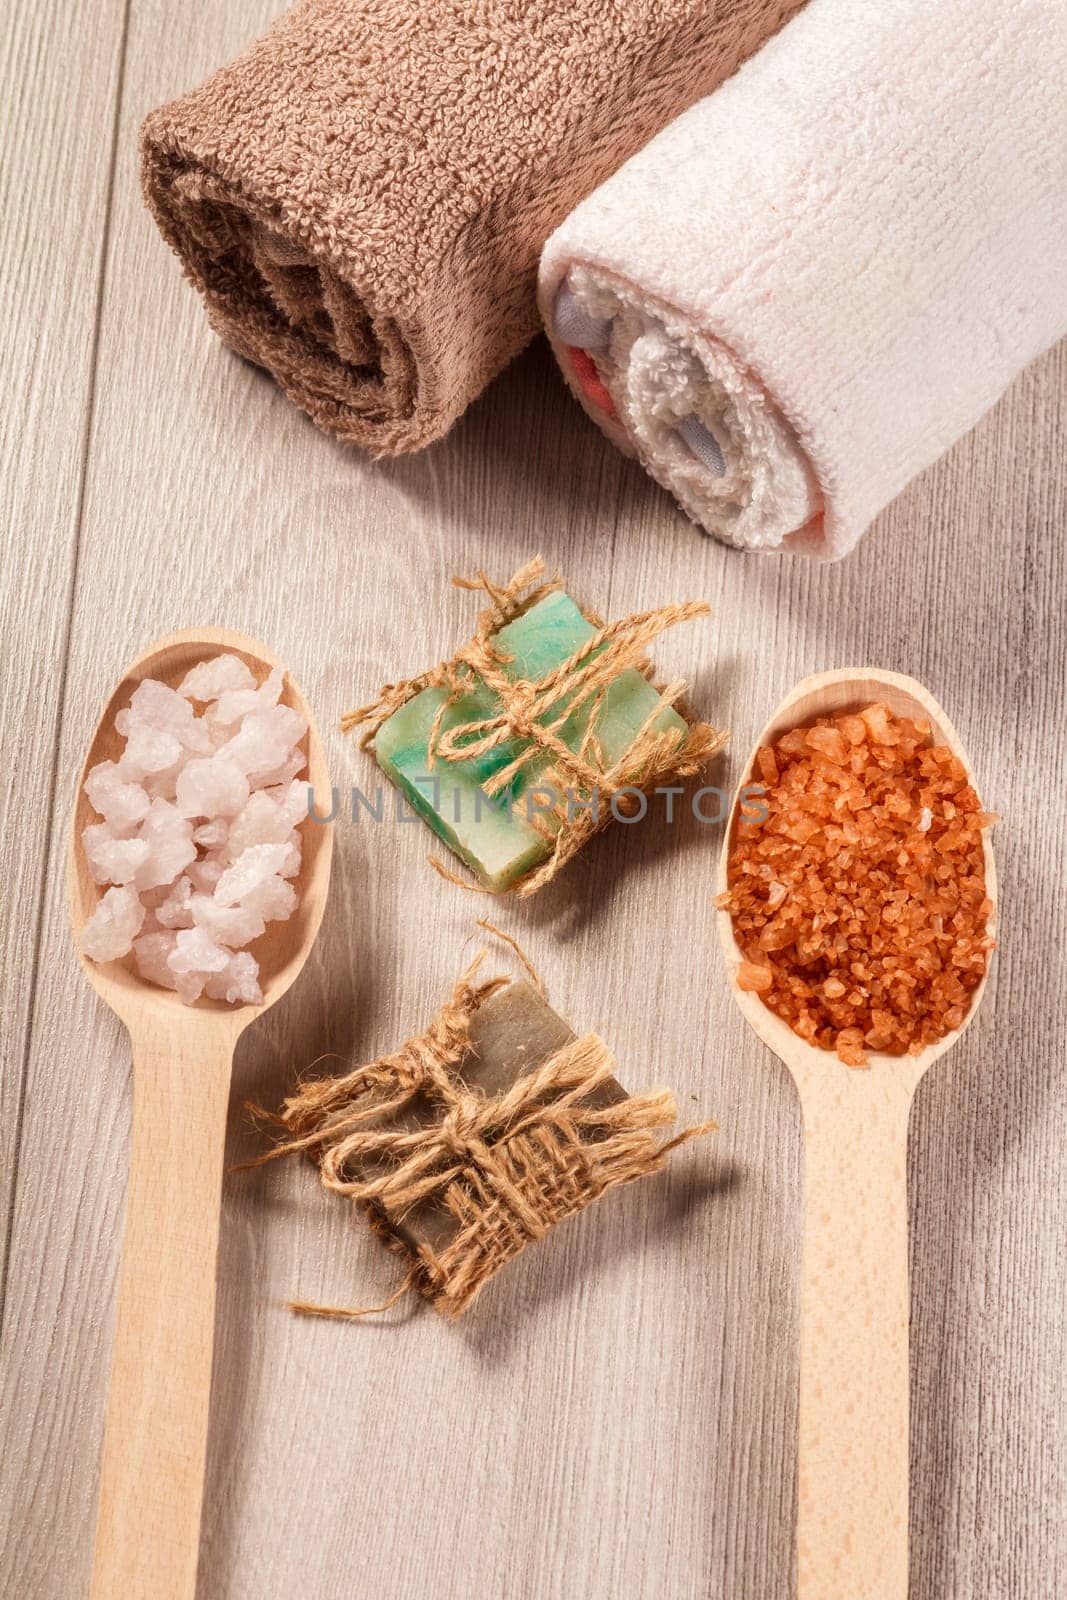 Wooden spoons with white and brown sea salt and handmade soap for bathroom procedures with towels on the background. Spa products and accessories